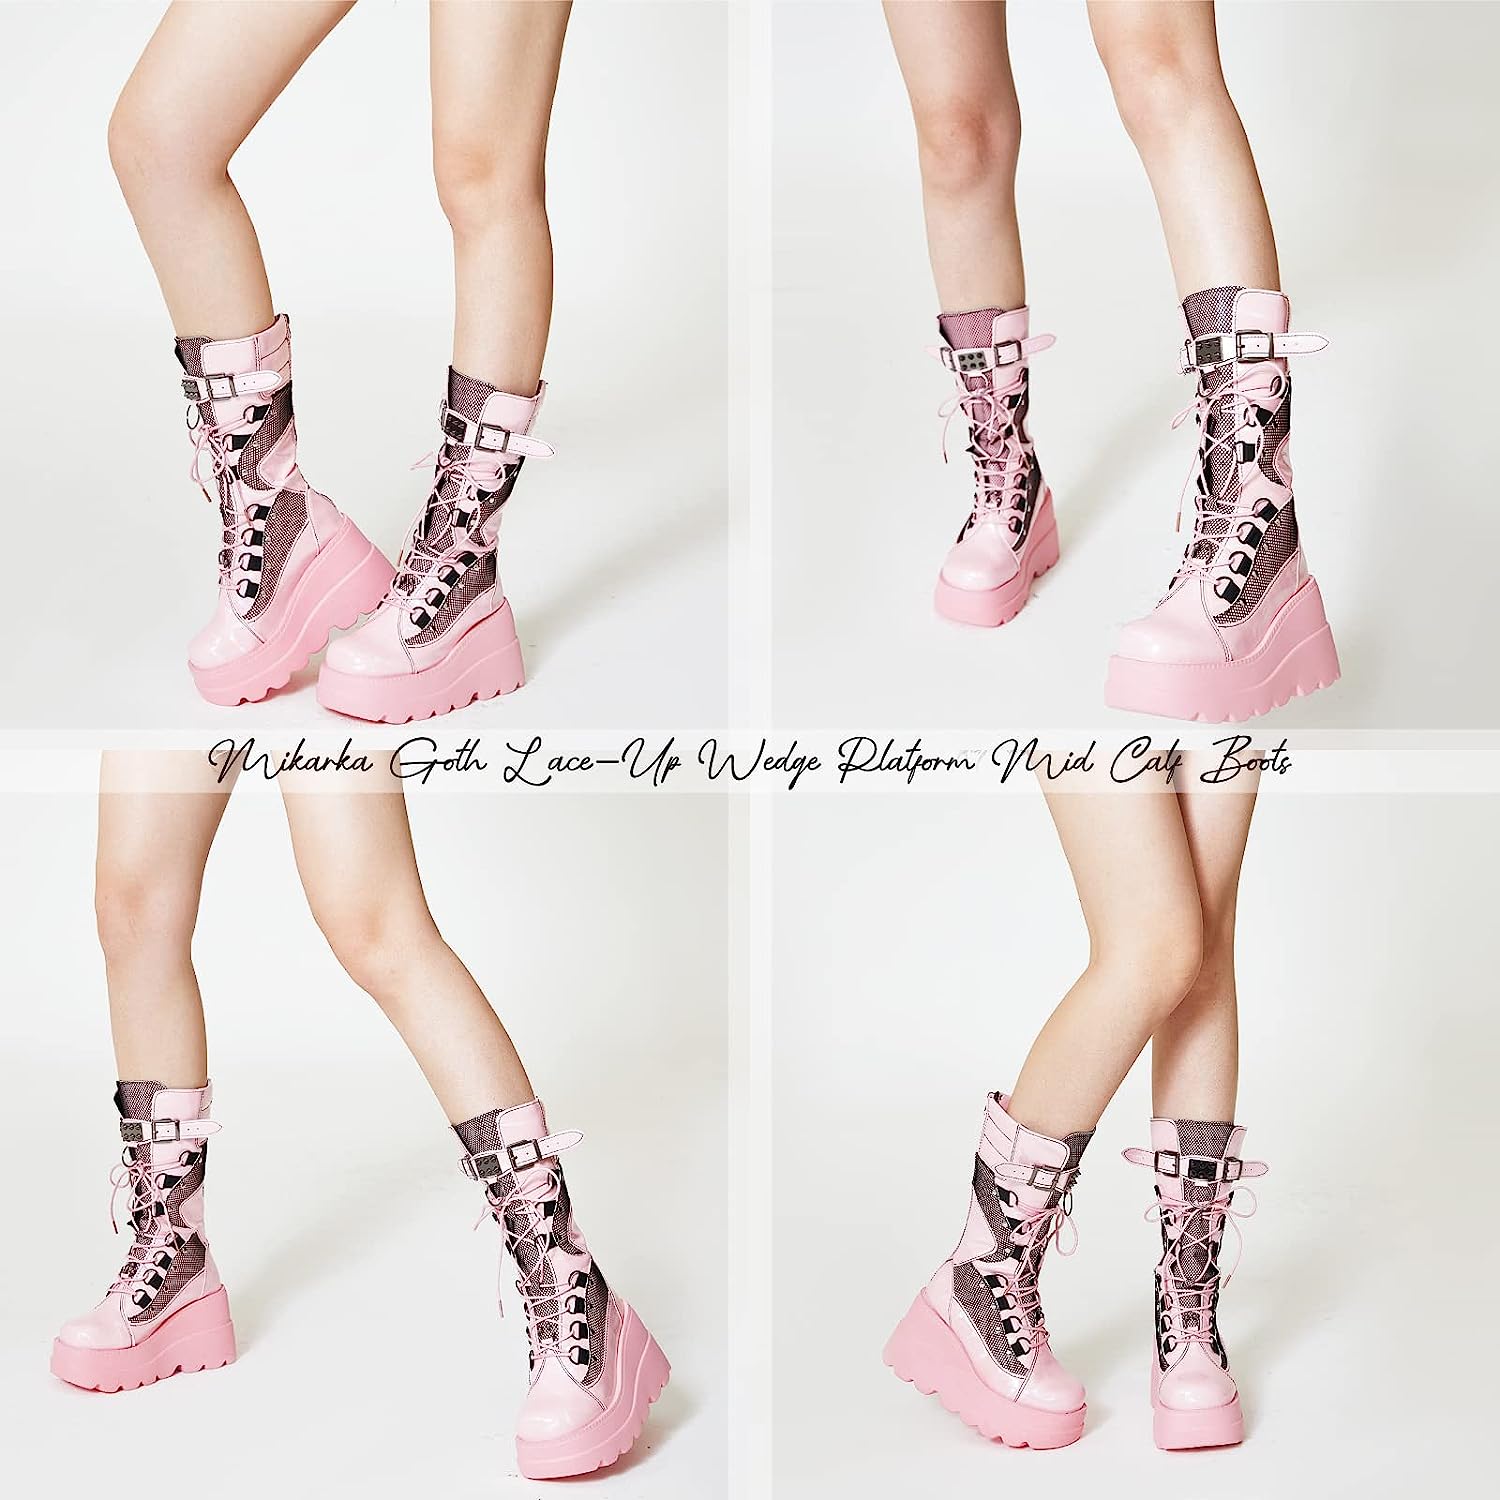 Womens Holographic Platform Mid Calf Combat Boots Lace Up Wedge Heel Studded Goth Knee High Boots